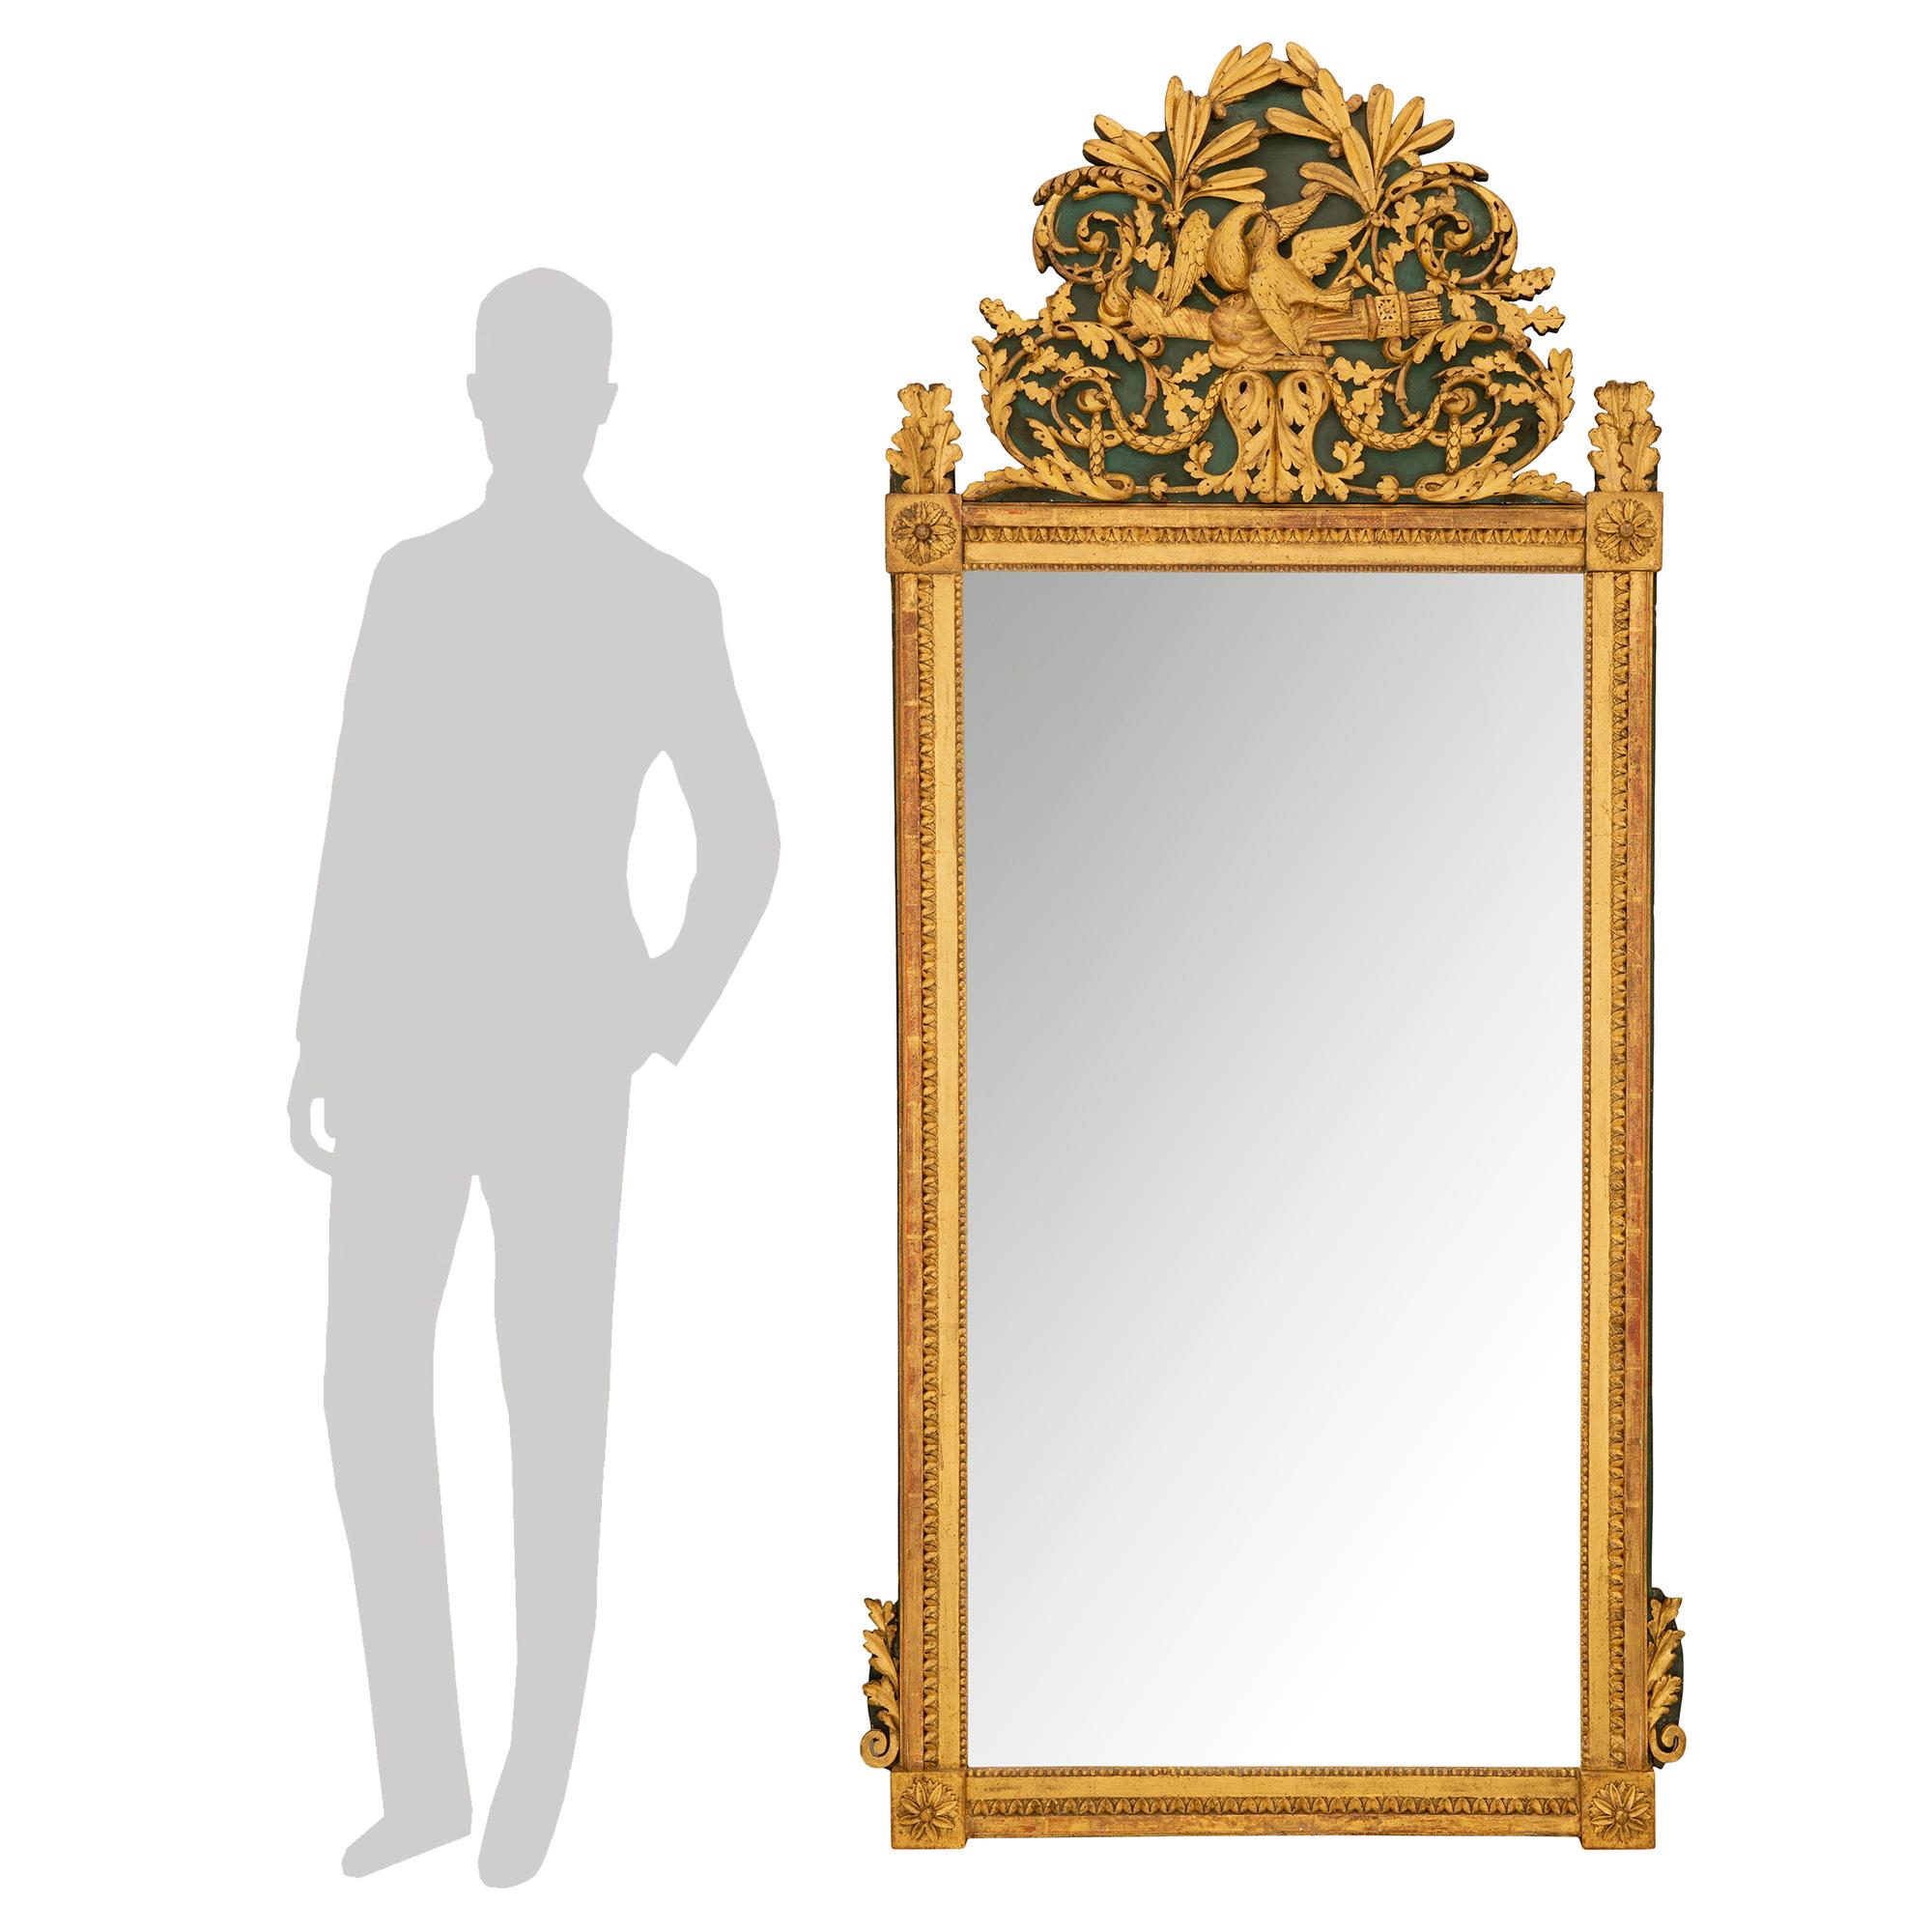 A most elegant and richly carved French 19th century Louis XVI st. giltwood and forest green mirror. The original mirror is framed within a finely detailed carved border with a lovely mottled and beaded design. Each corner displays a carved rosette